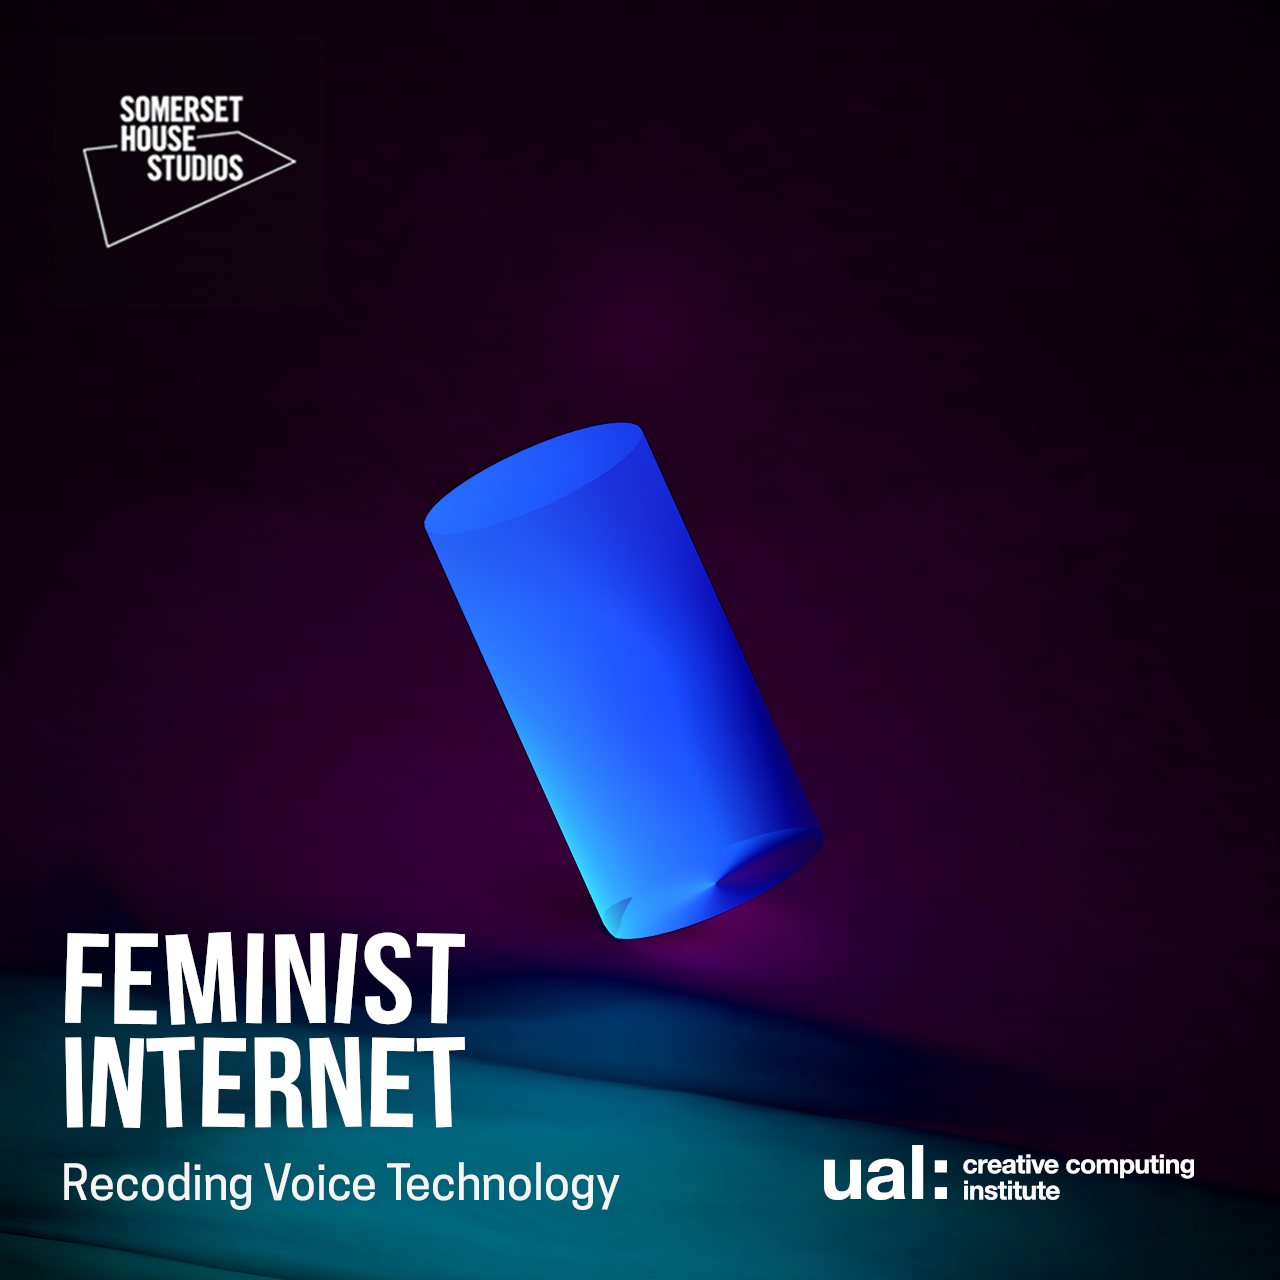 recoding-voice-technology-is-a-feminist-alexa-possible-feminist-internet